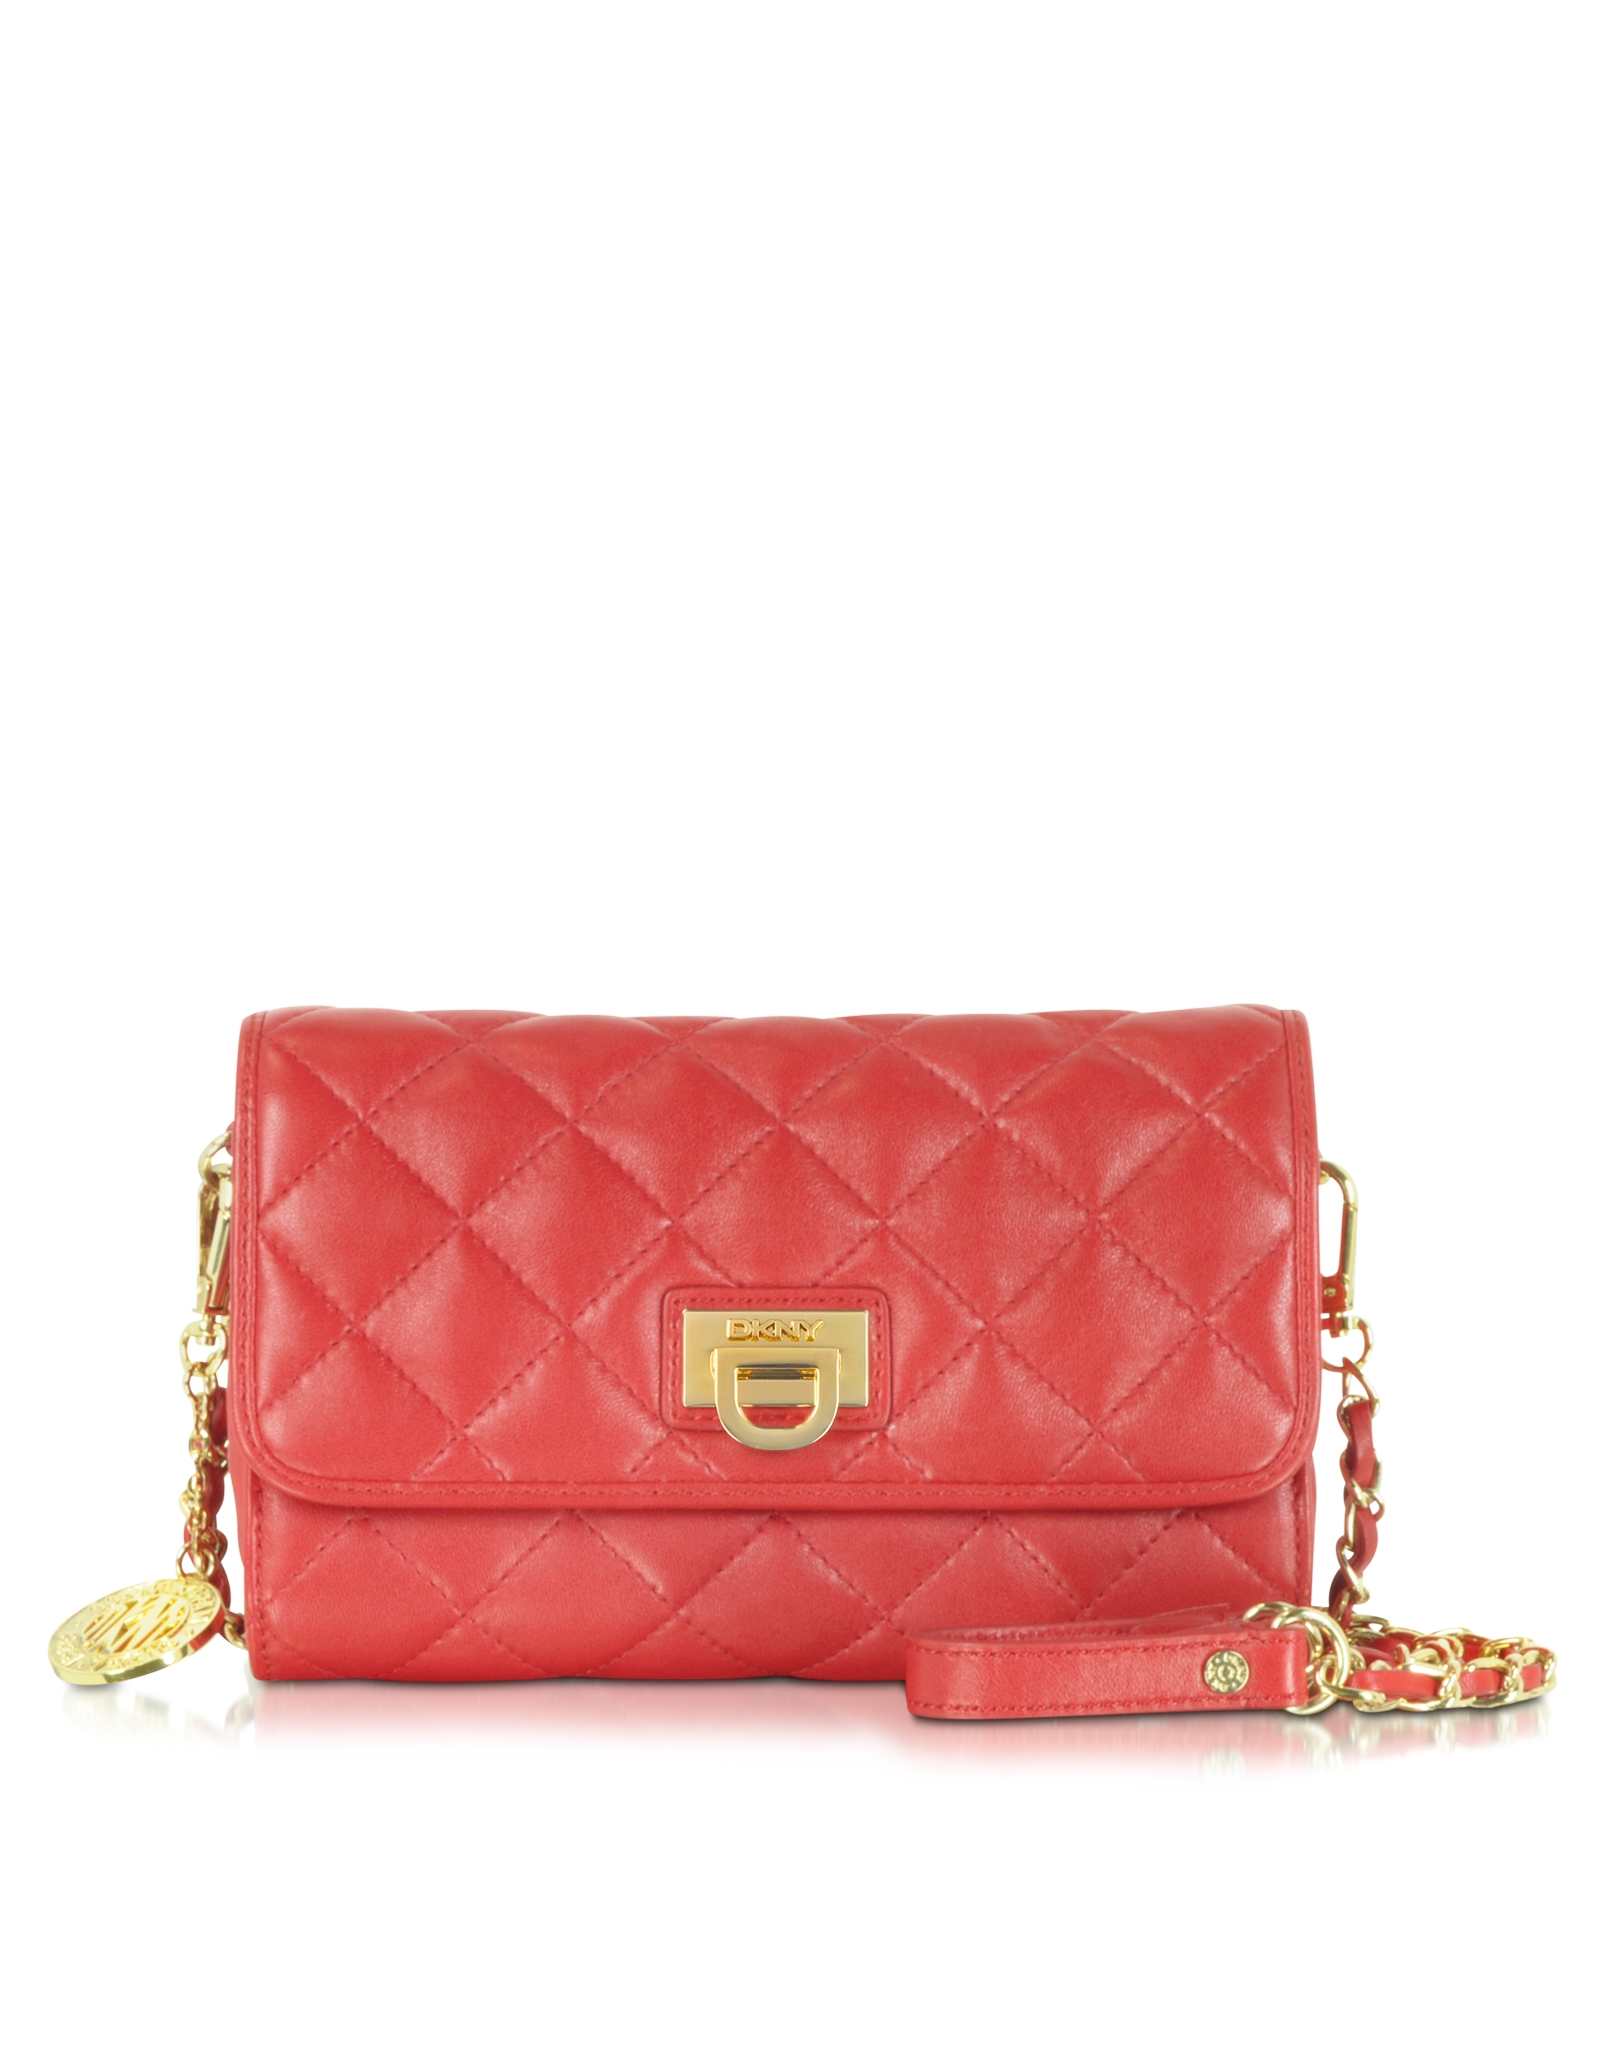 Lyst - Dkny Gansevoort Small Quilted Leather Shoulder Bag in Red